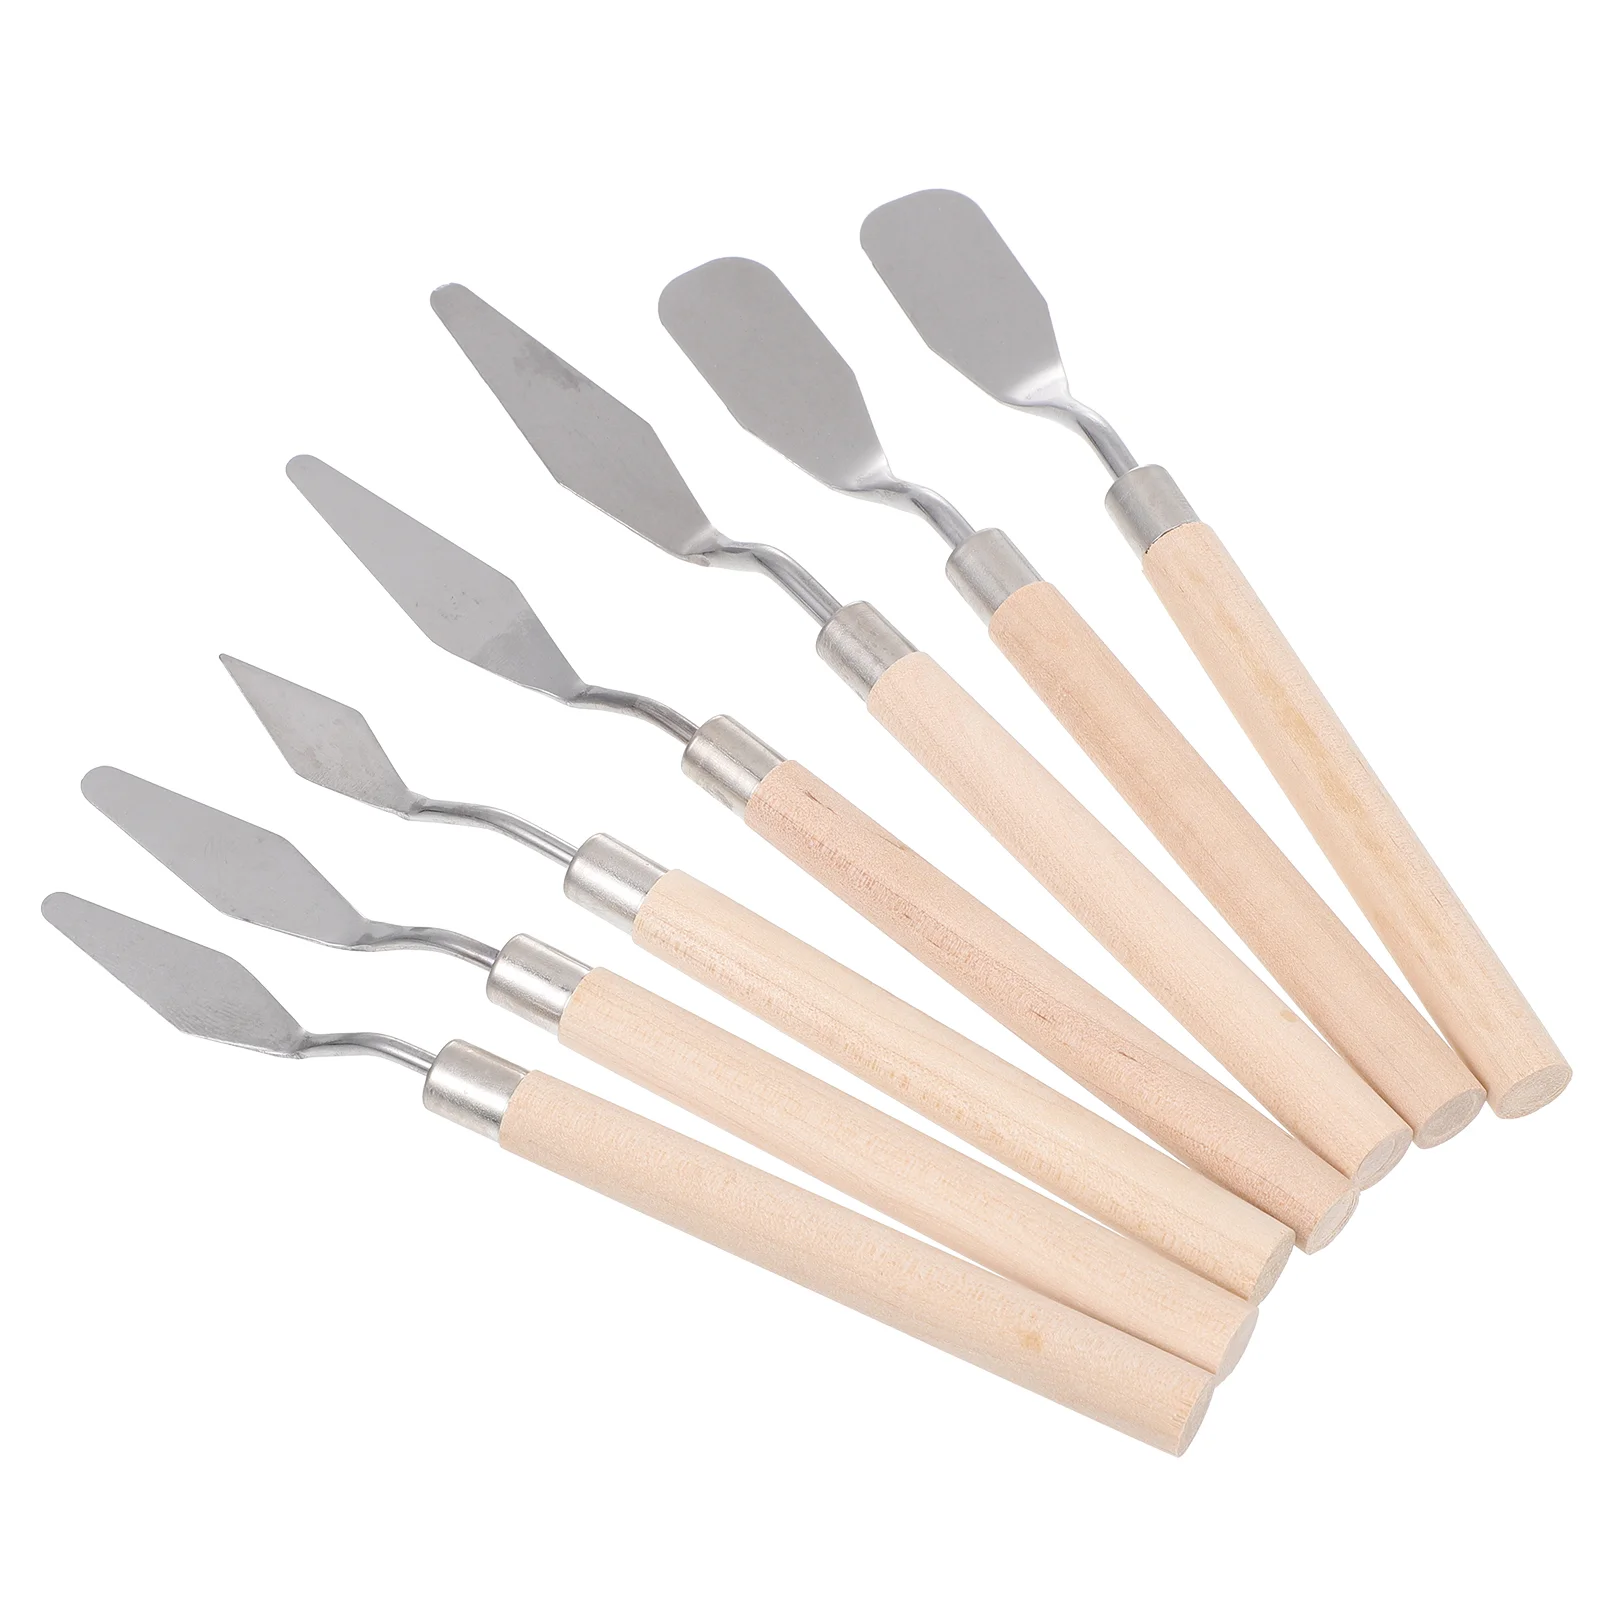 7 Pcs Scraper Make up Spatula Portable Paint Students Tool Painting Supplies Wallpaper Wood Accessories for Pigment